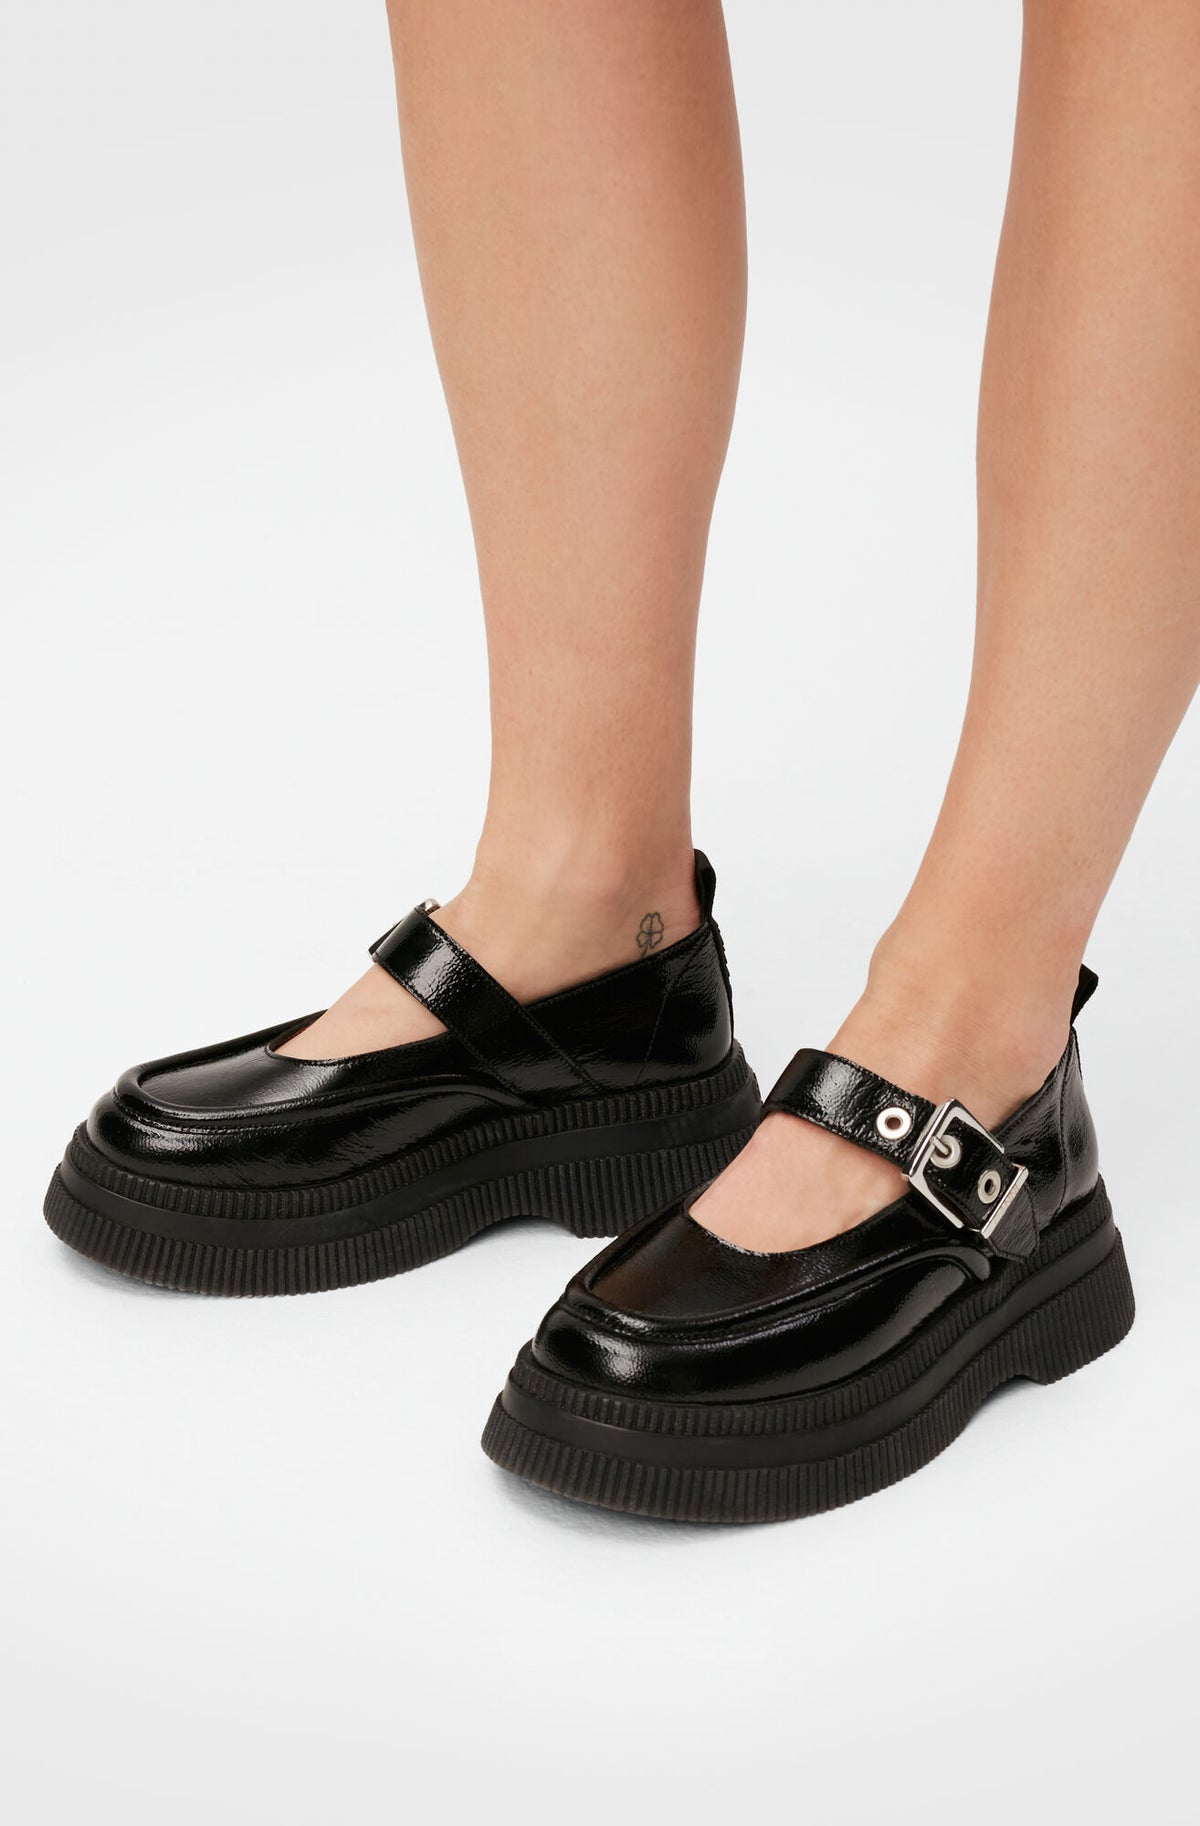 Ganni Mary Jane platform creepers black patent leather | Pipe and Row ...